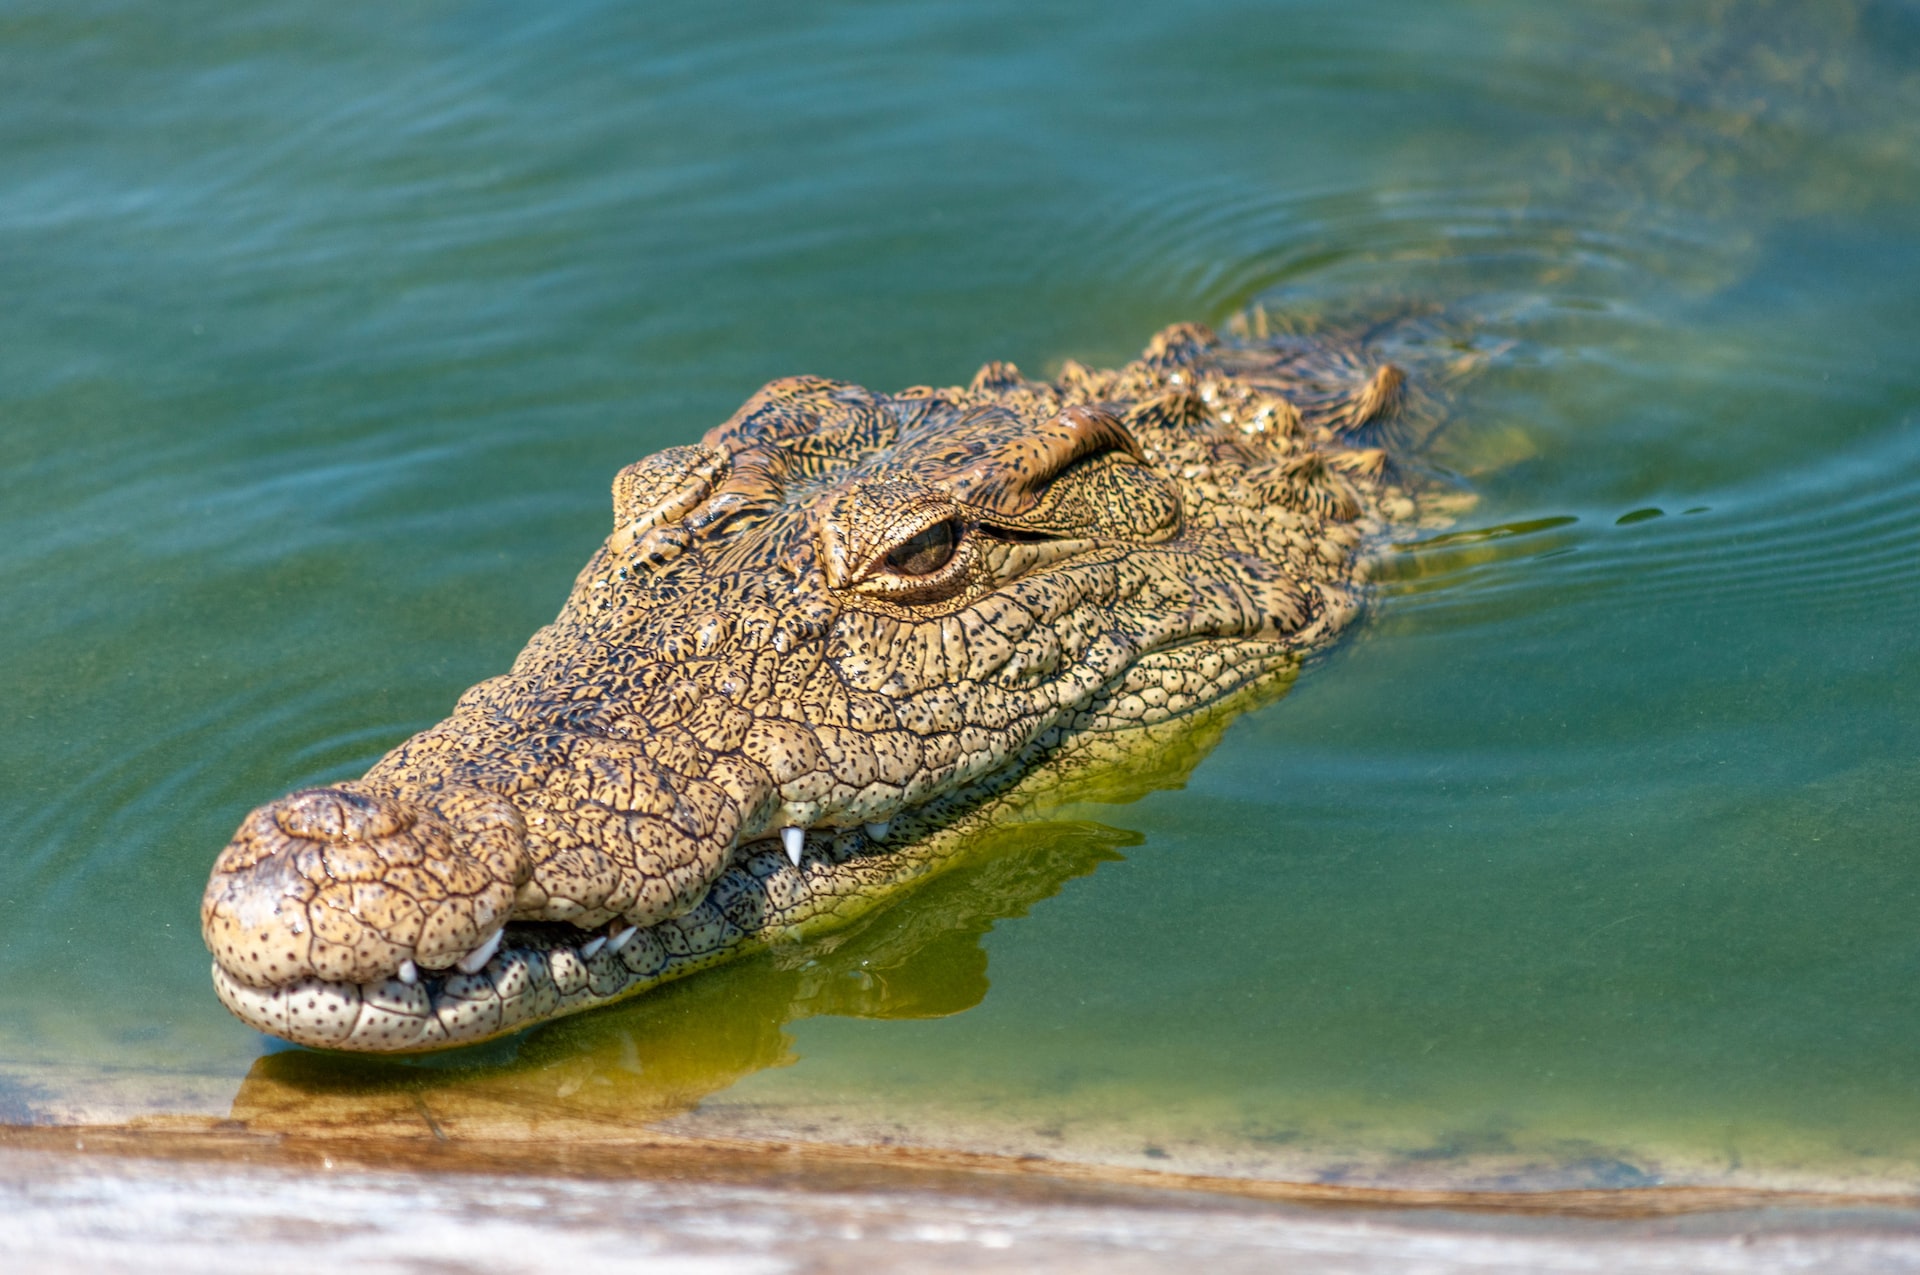 The Solitary and Territorial Creatures: A Look at the Carnivorous and Adaptable Crocodile